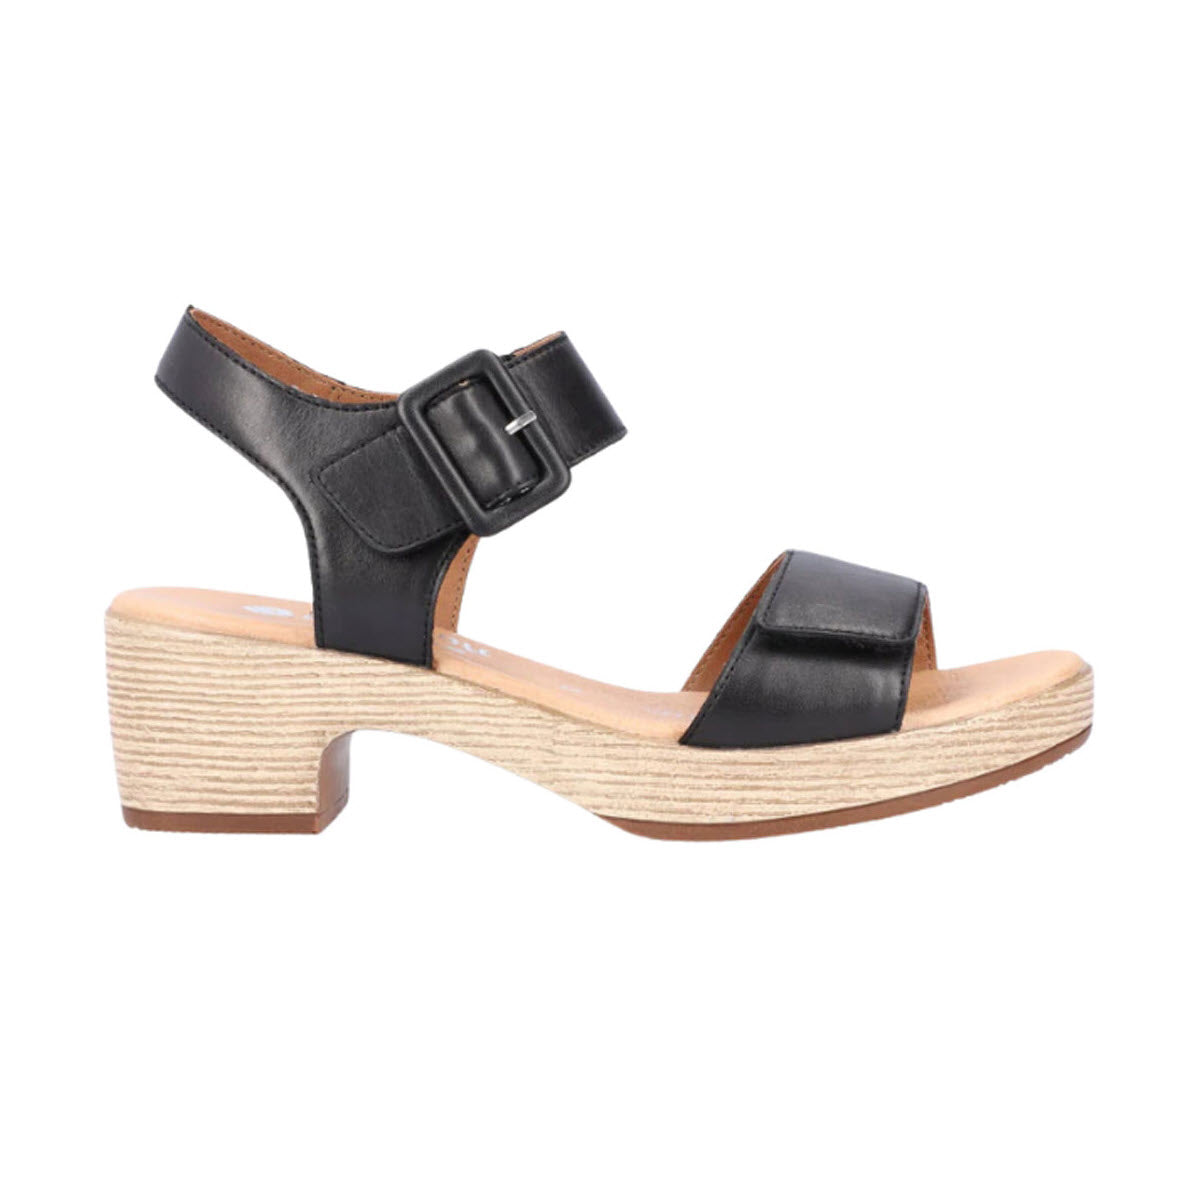 Remonte black leather upper sandal with a chunky beige heel and a buckle strap, isolated on a white background.